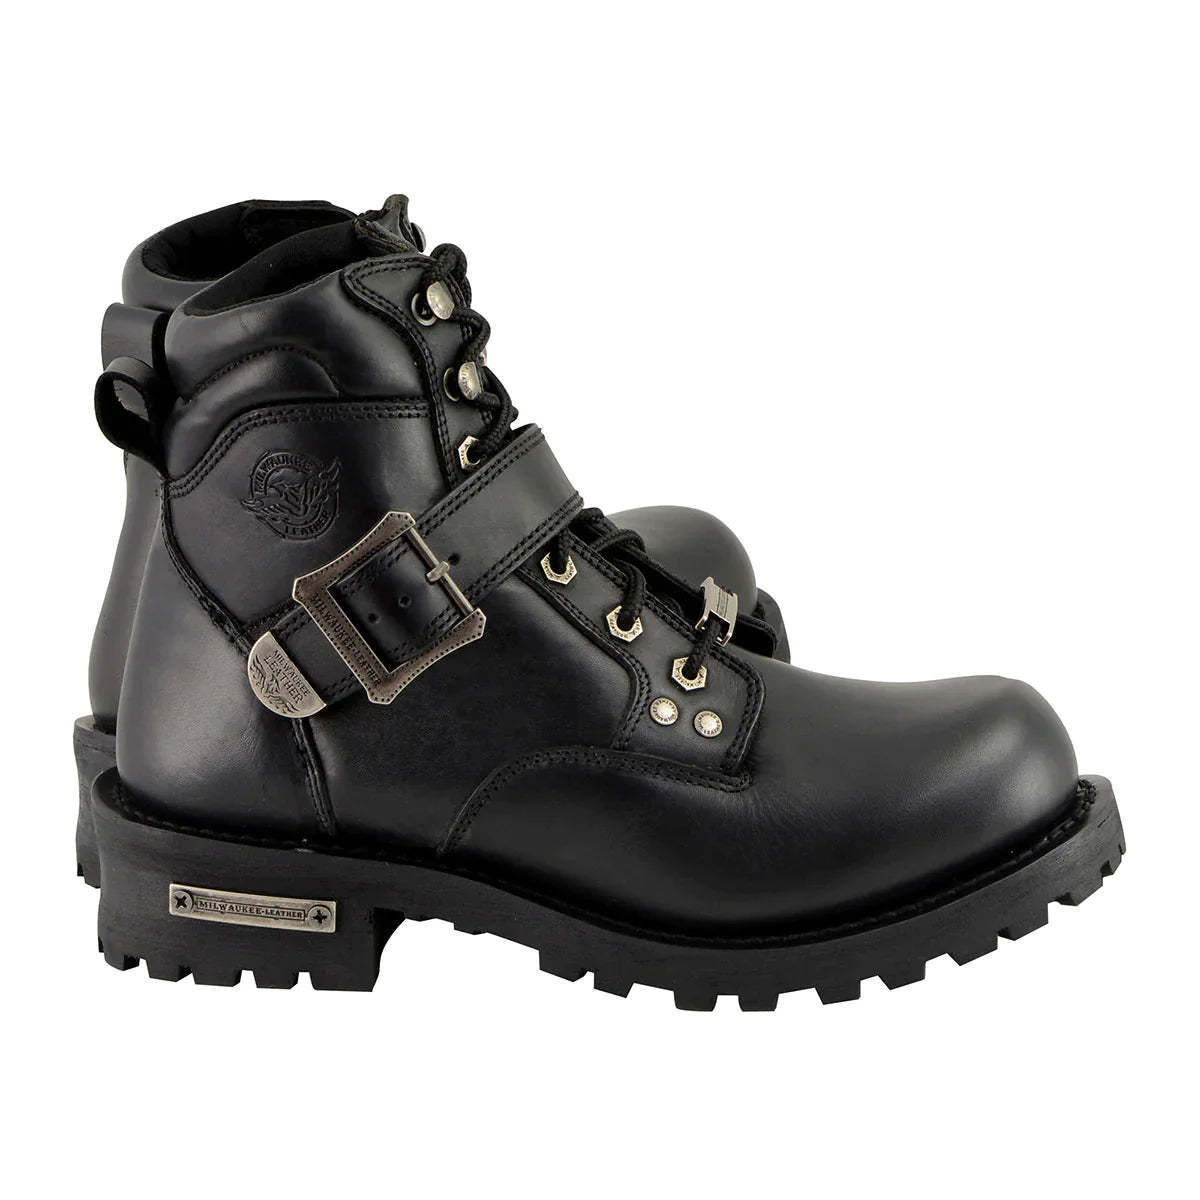 Men's Black 'Wide-Width' Lace-Up 6-inch Engineer Boots with Side Buckle